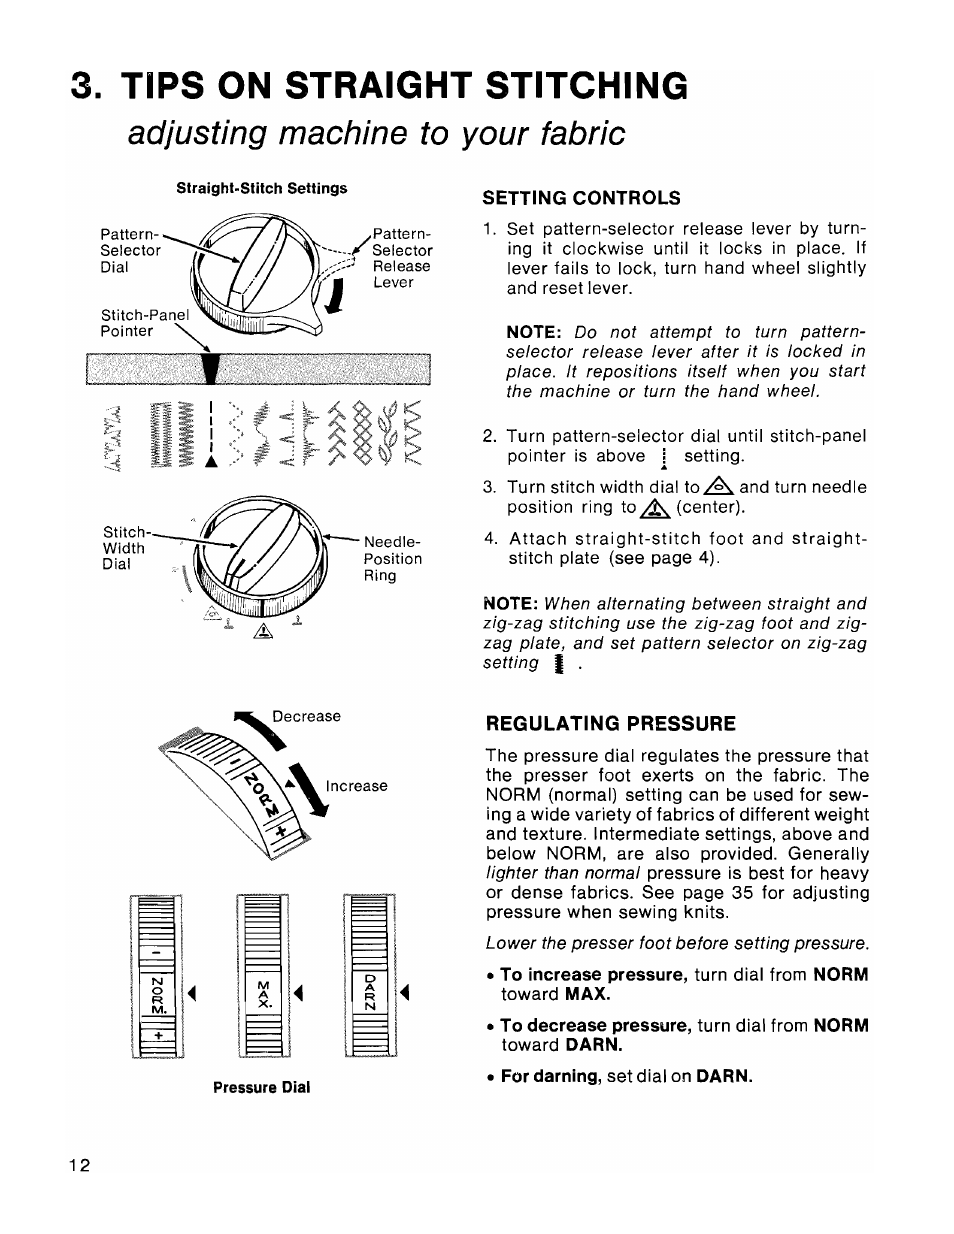 Tips on straight stitching, Adjusting machine to your fabric, Setting controls | Regulating pressure | SINGER 1036 Creative Touch User Manual | Page 17 / 66